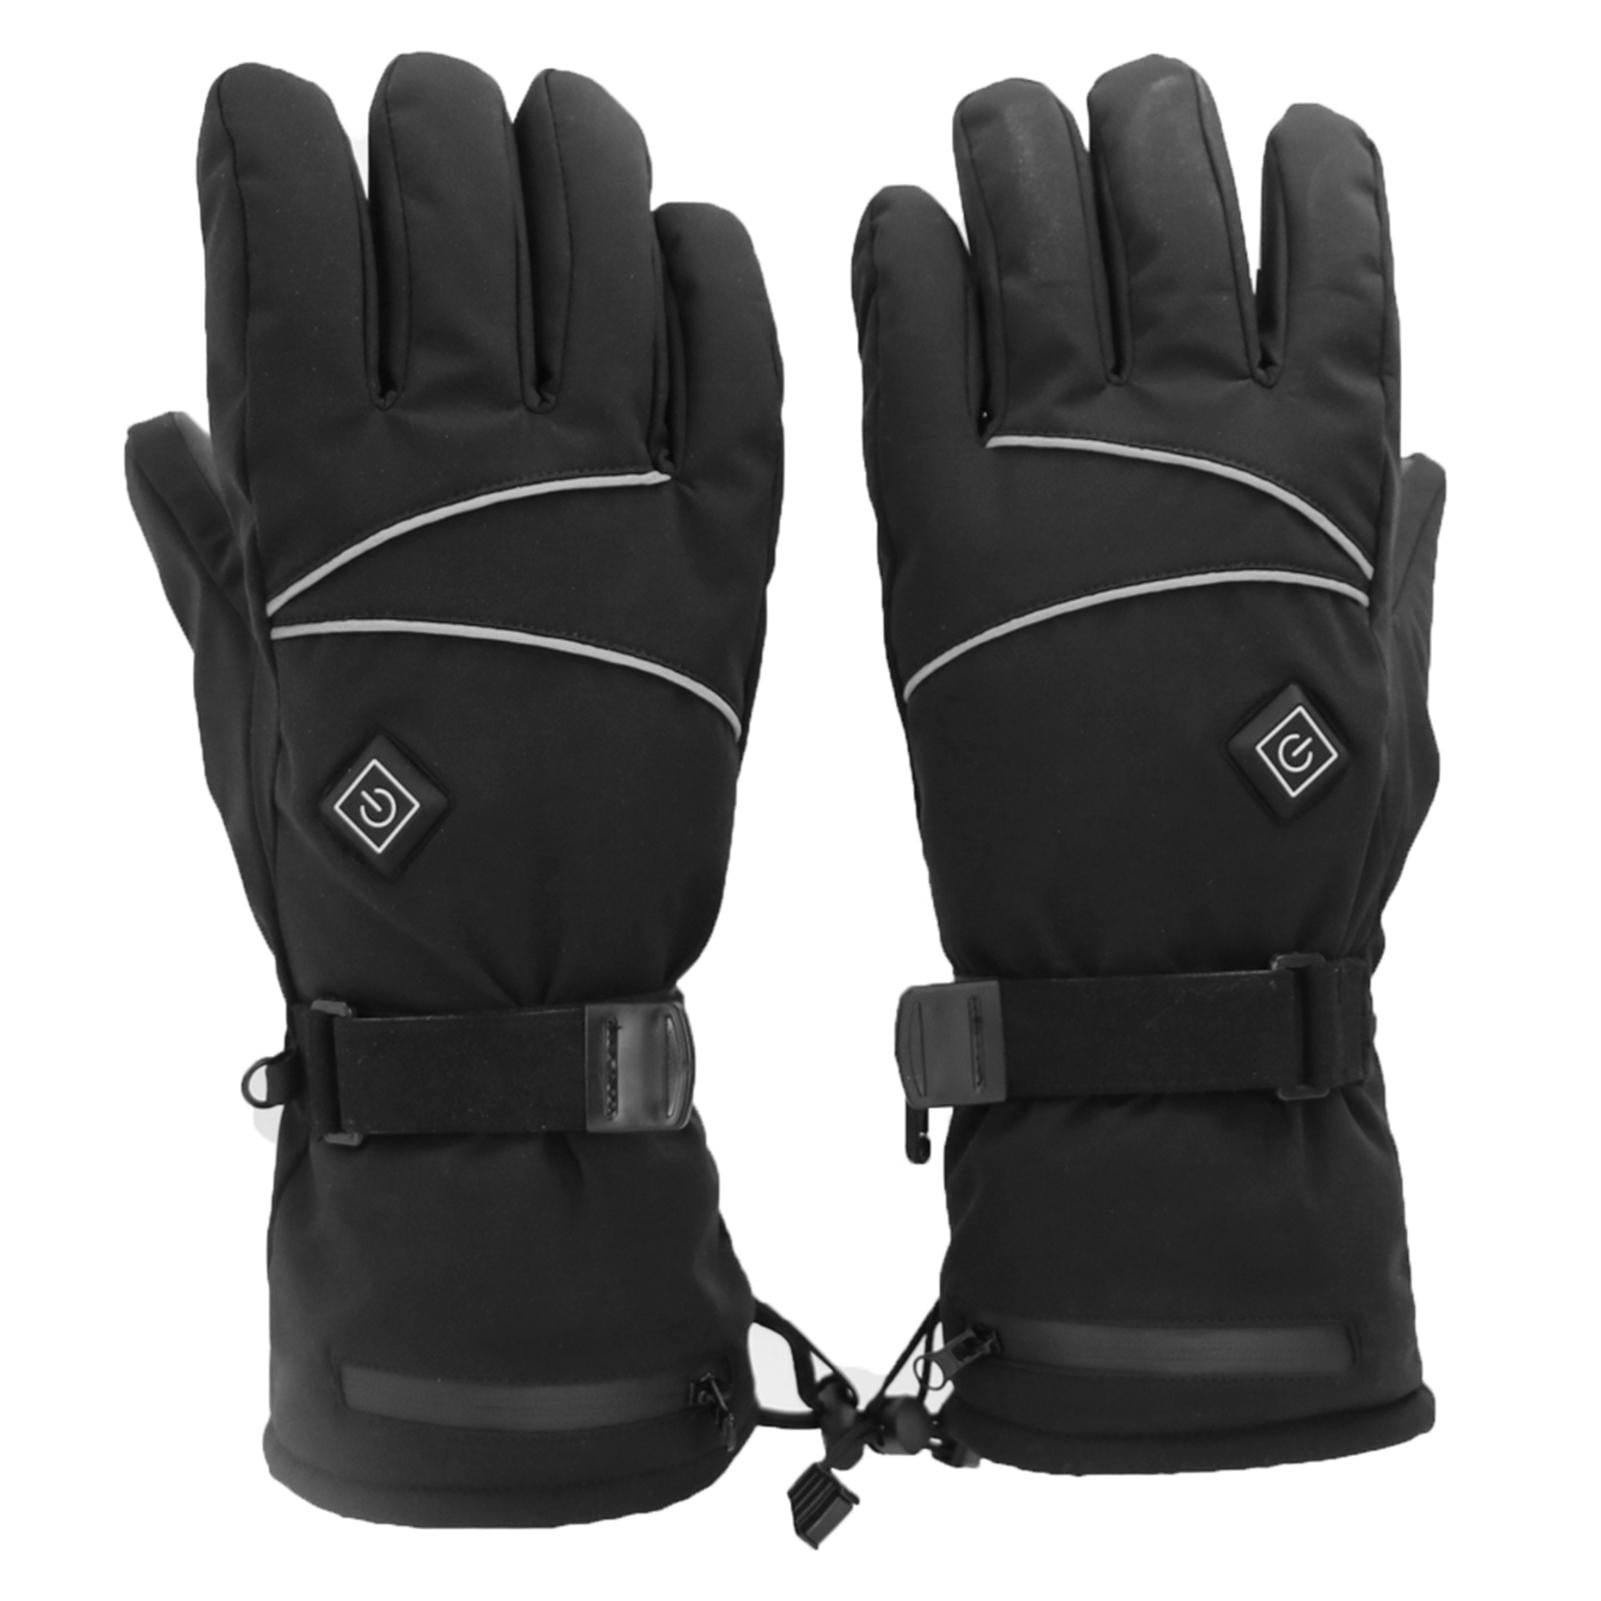 Details about   Gloves Shockproof Racing Motocross Bike Cycling Brand new brand new Hot sale New 